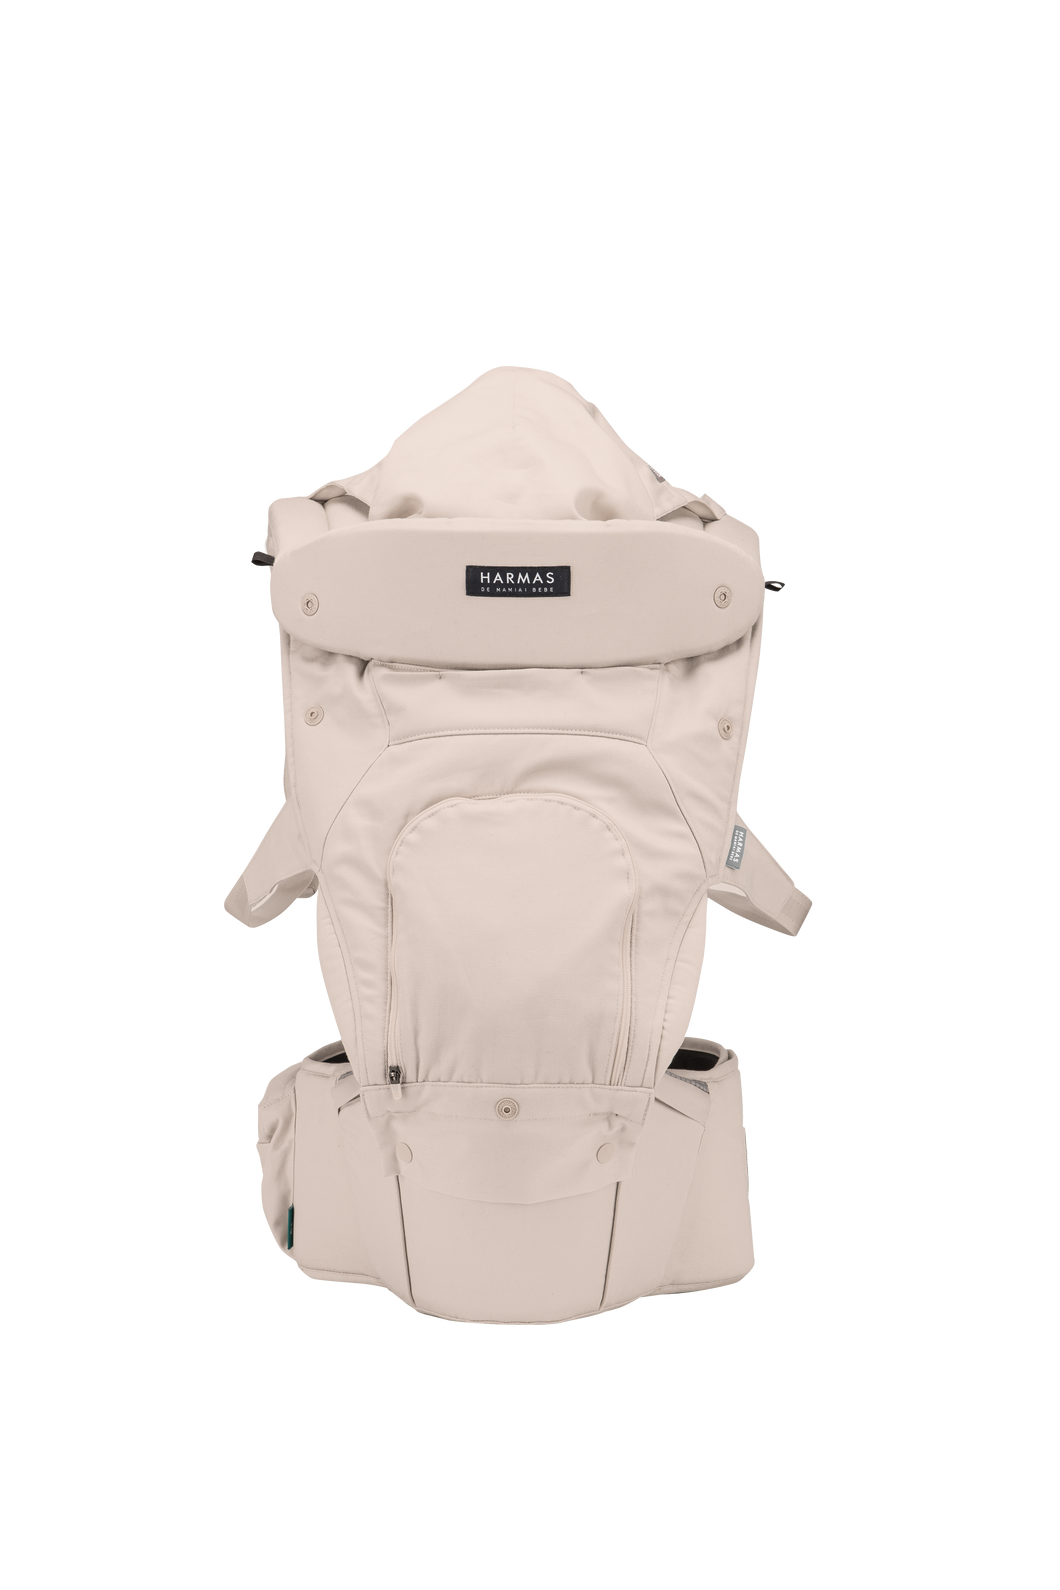 [ Harmas ] Baby Carrier with Hip Seat - Light Fit